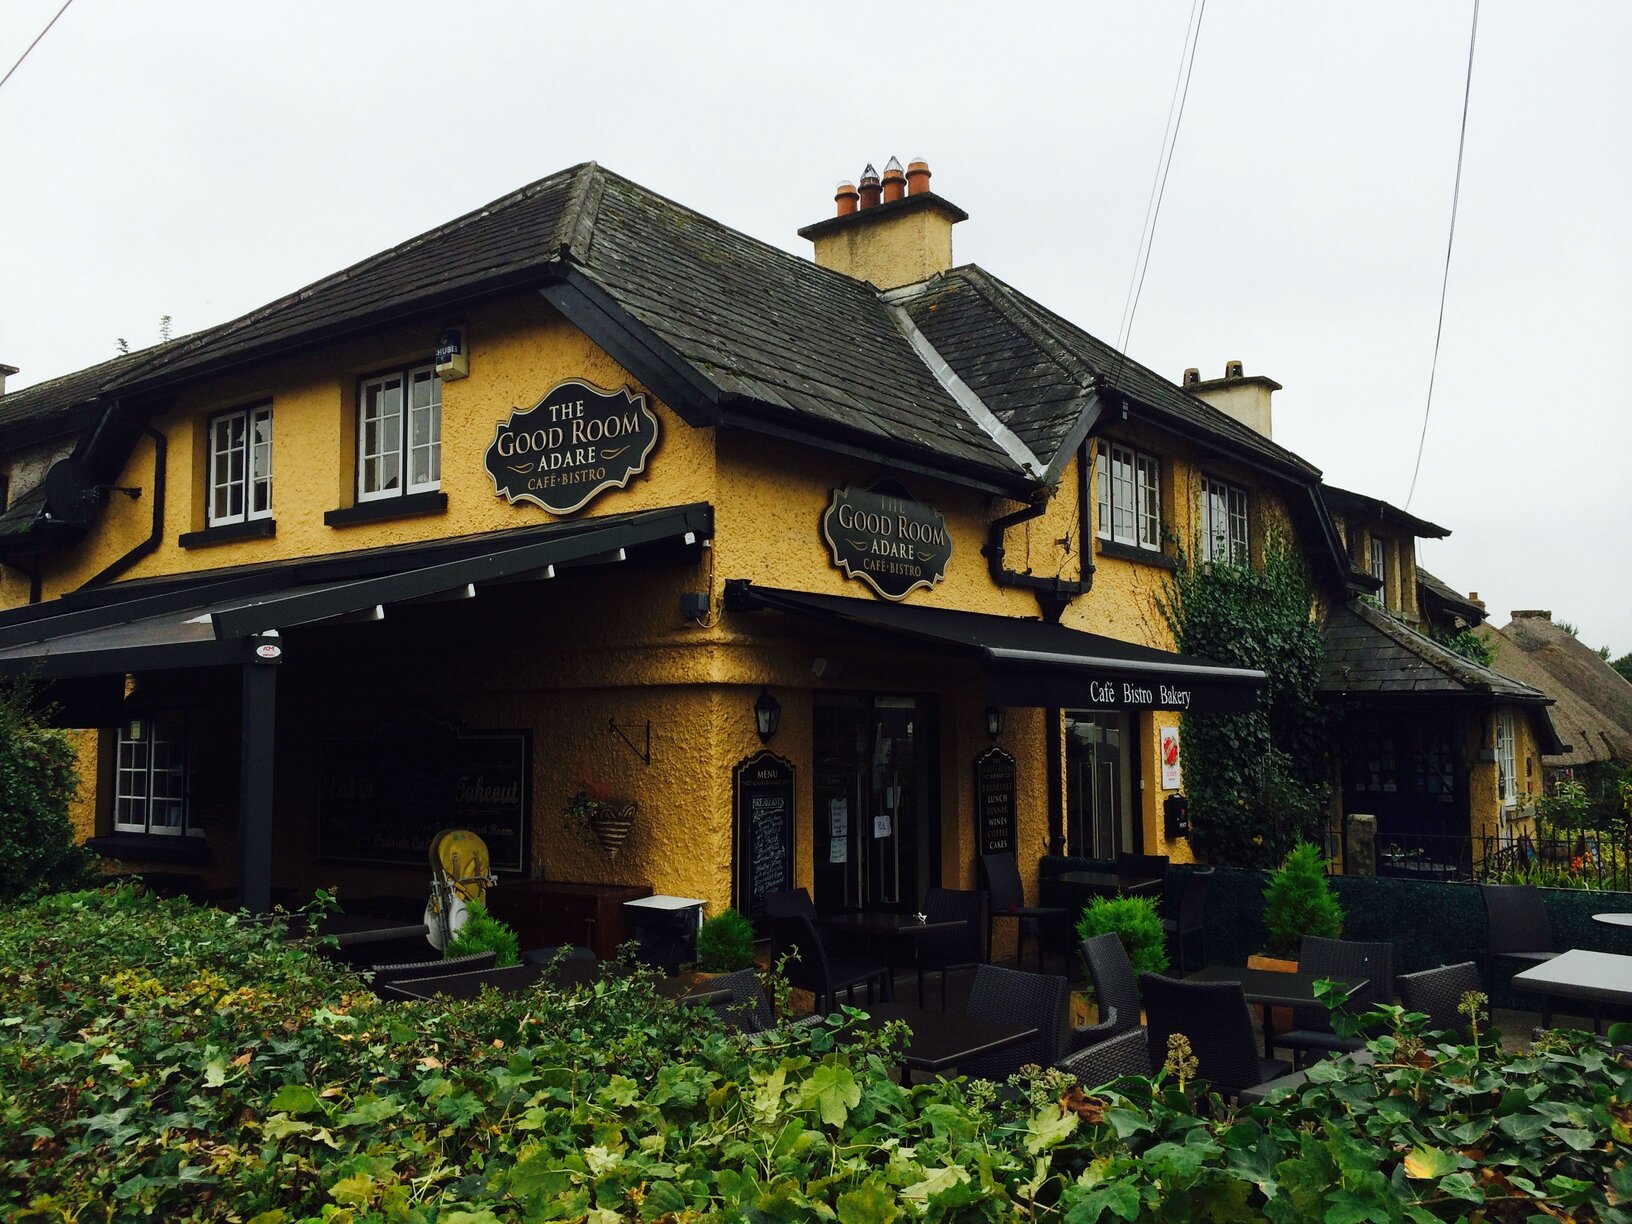 The Good Room in Adare has opened its doors once again after taking the decision to close temporarily due to COVID-19.